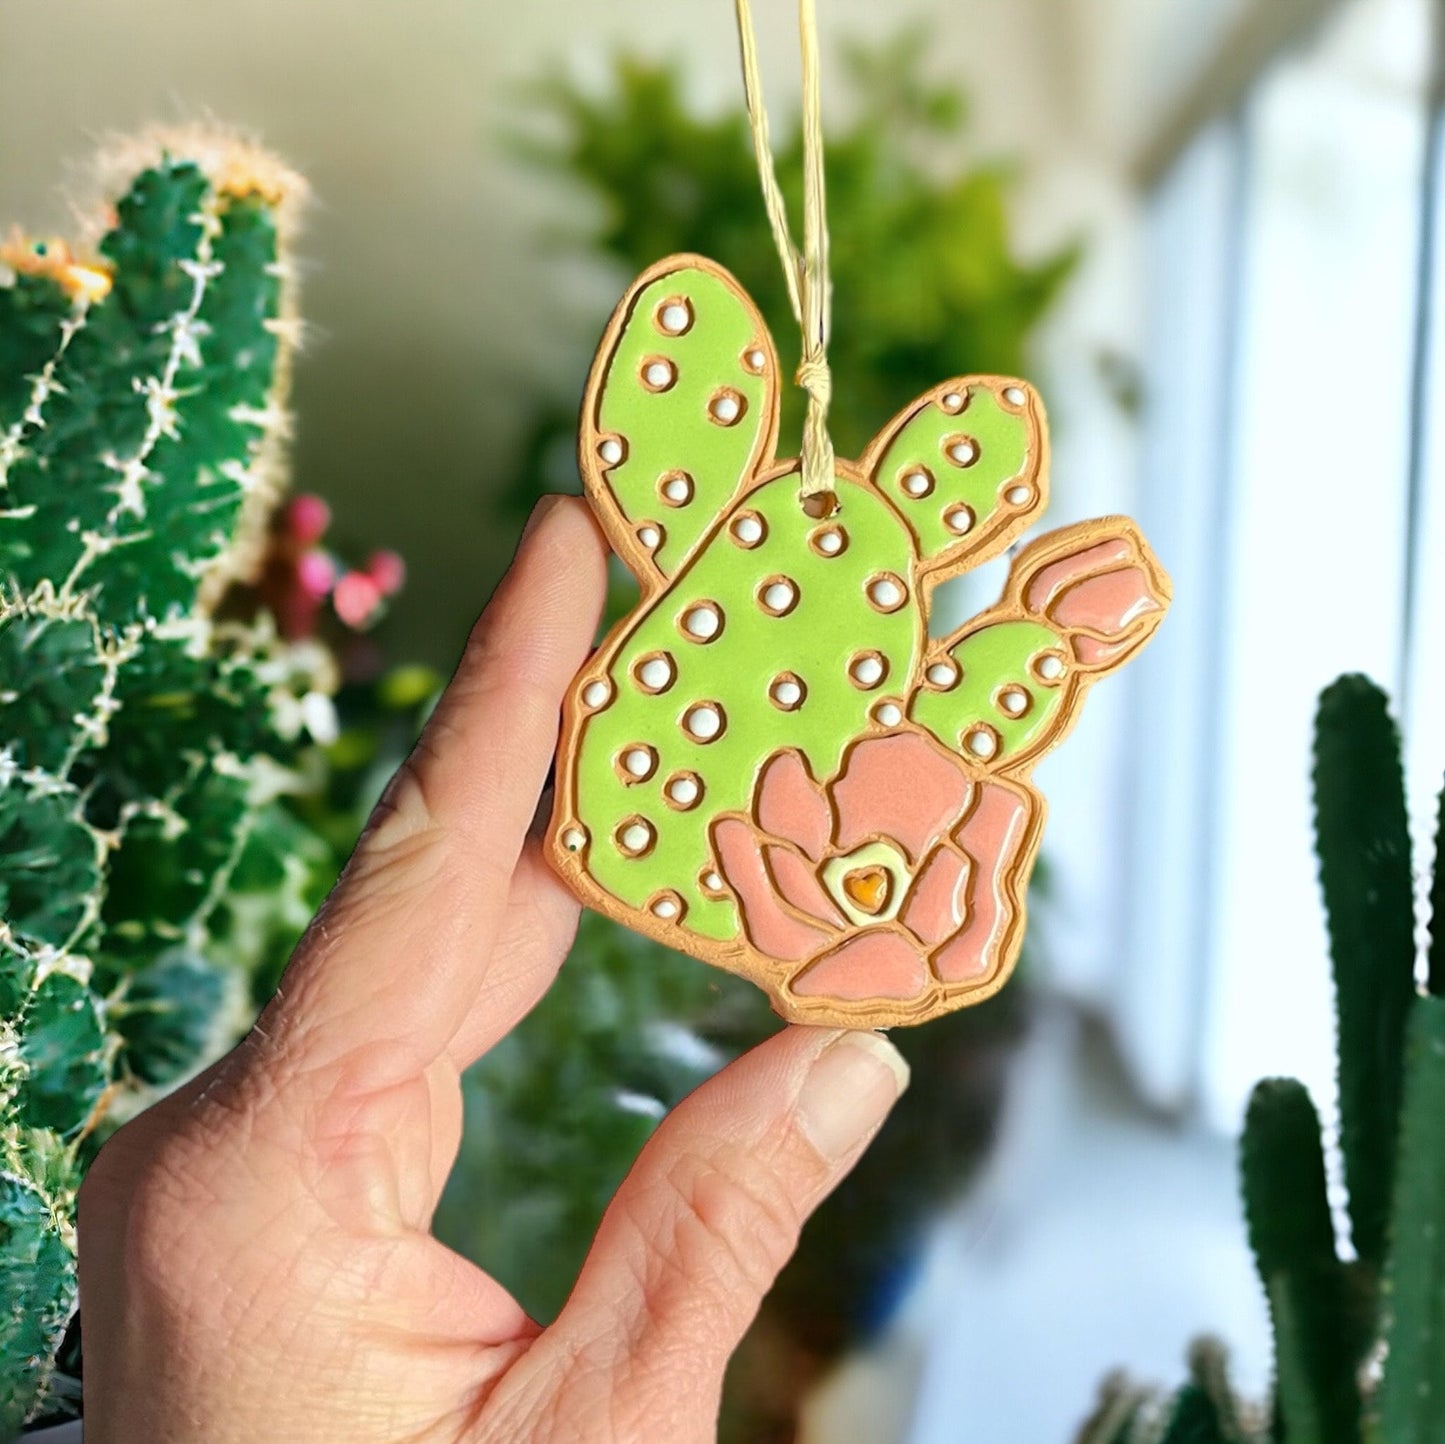 Prickly Pear Cactus & Flower Ornament